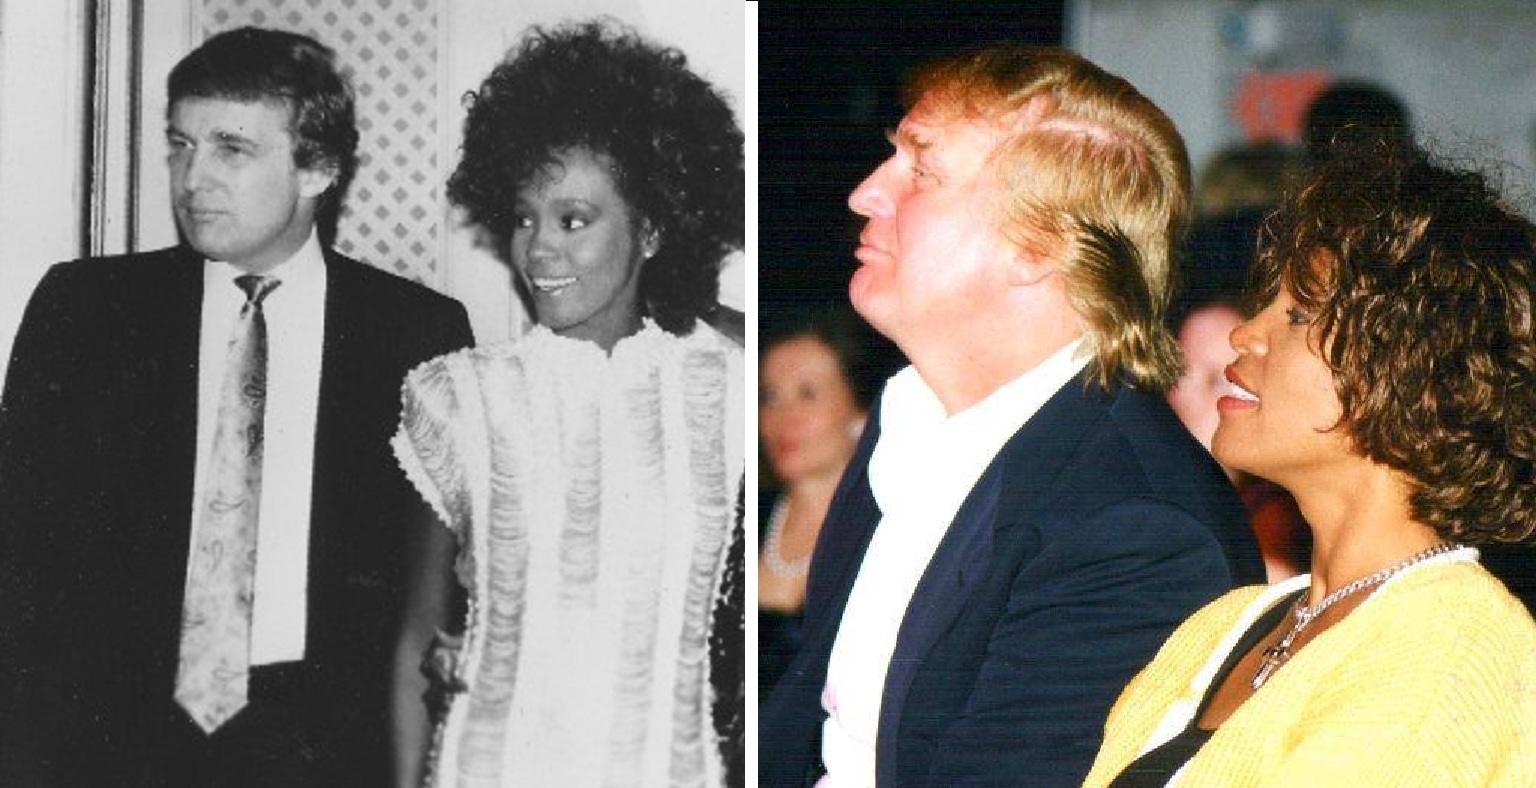 Donald Trump Tried to “Save His Friend Whitney Houston”, Says Beach Boys Singer Mike Love